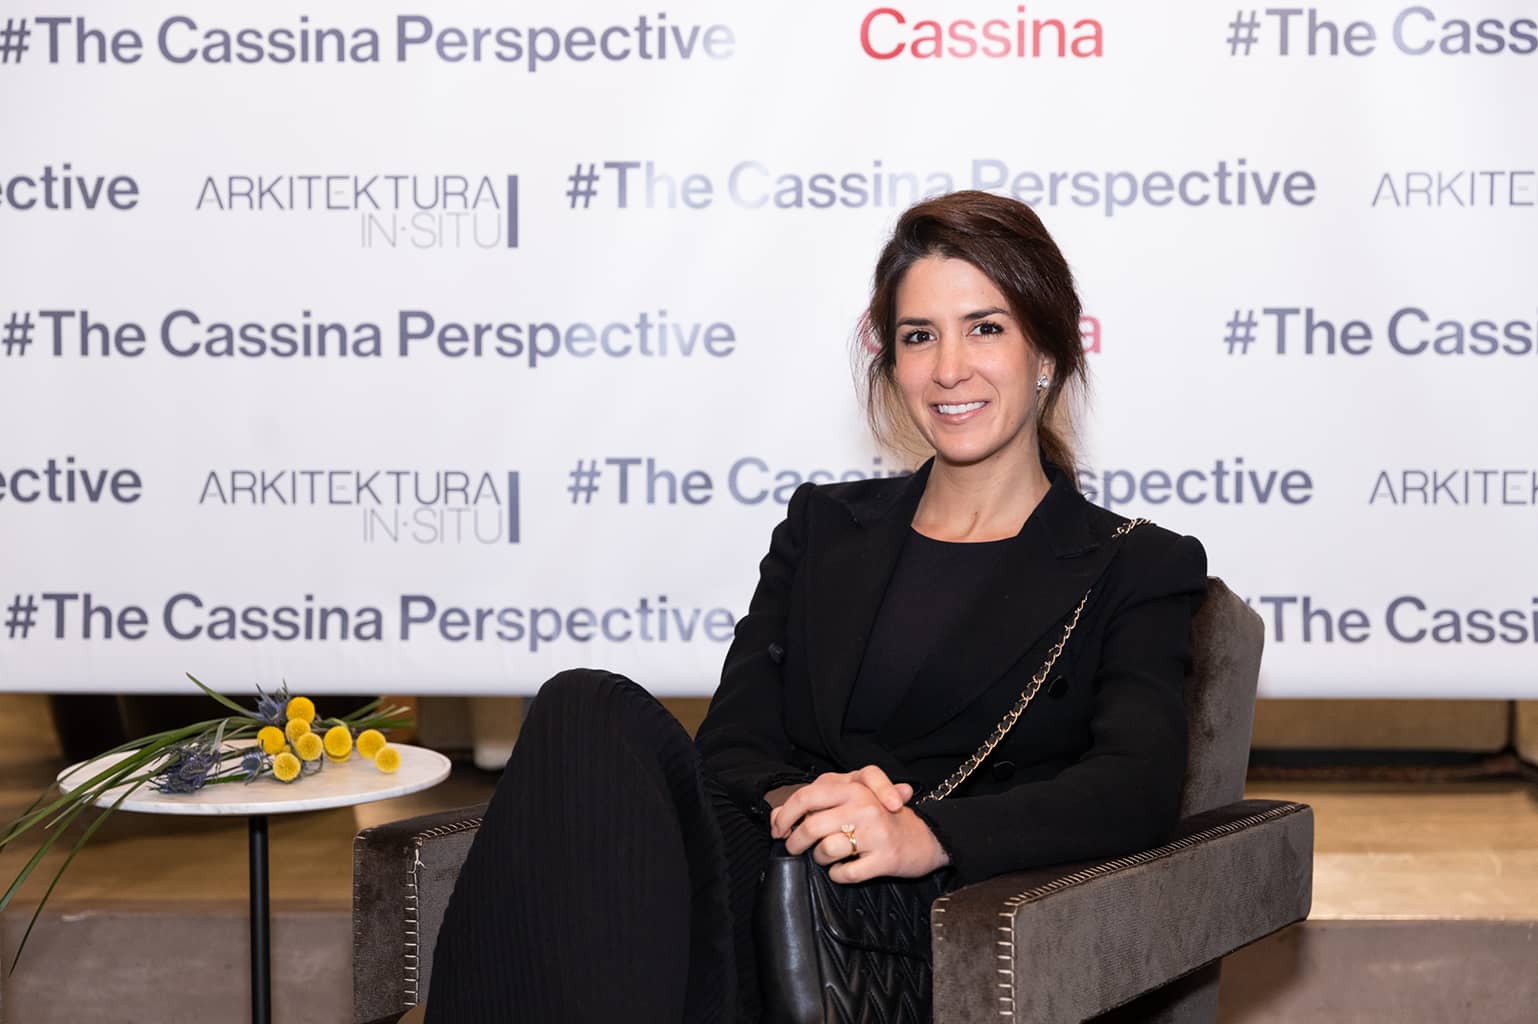 5 Questions with Patricia Urquiola of Cassina on dissecting design